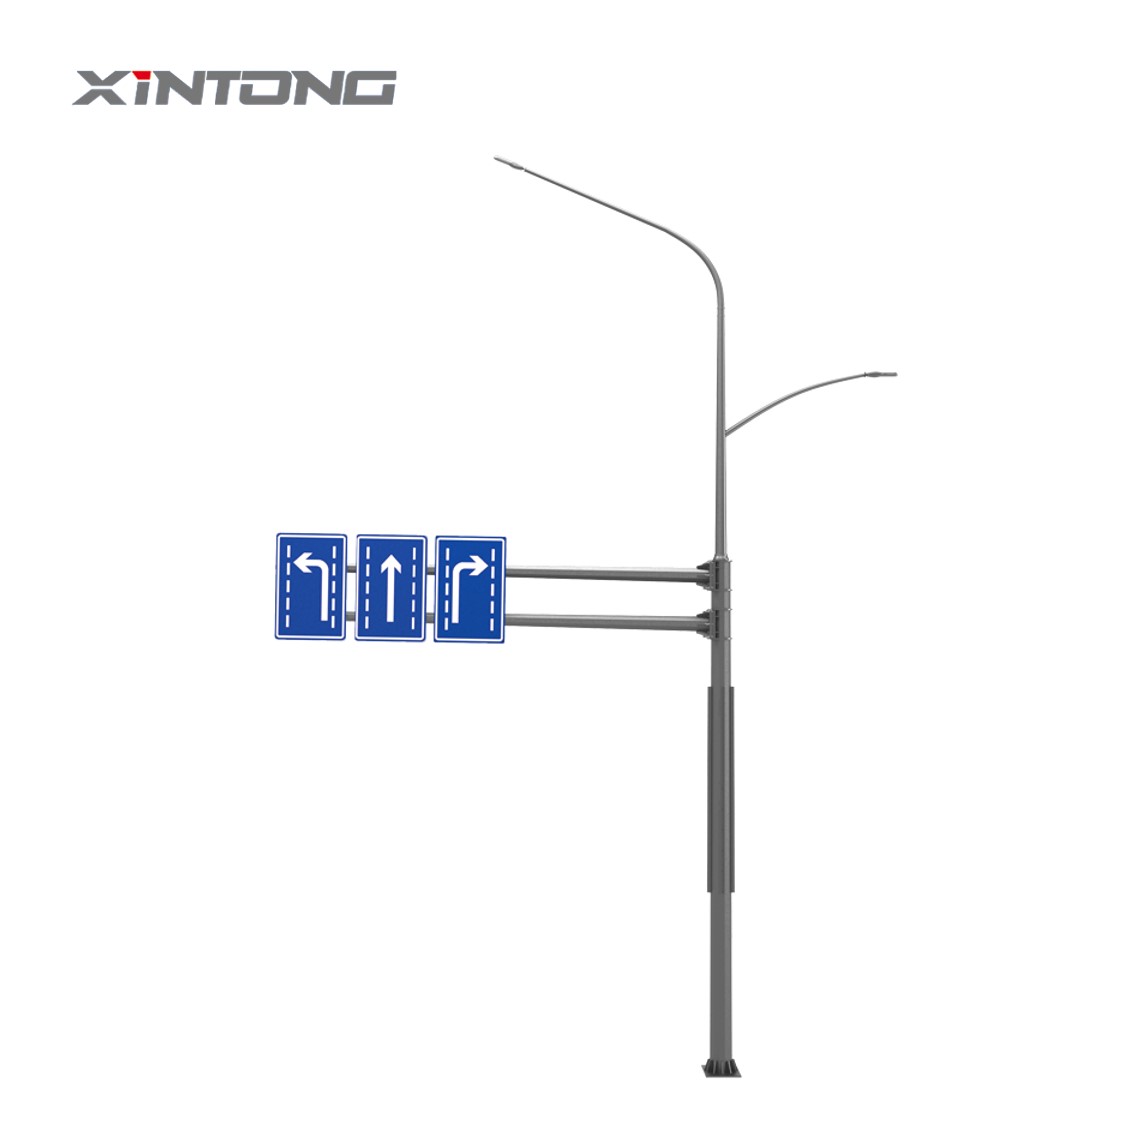 Highly Efficient and Eco-Friendly All In One Solar Street Light for Illuminating Roads and Pathways